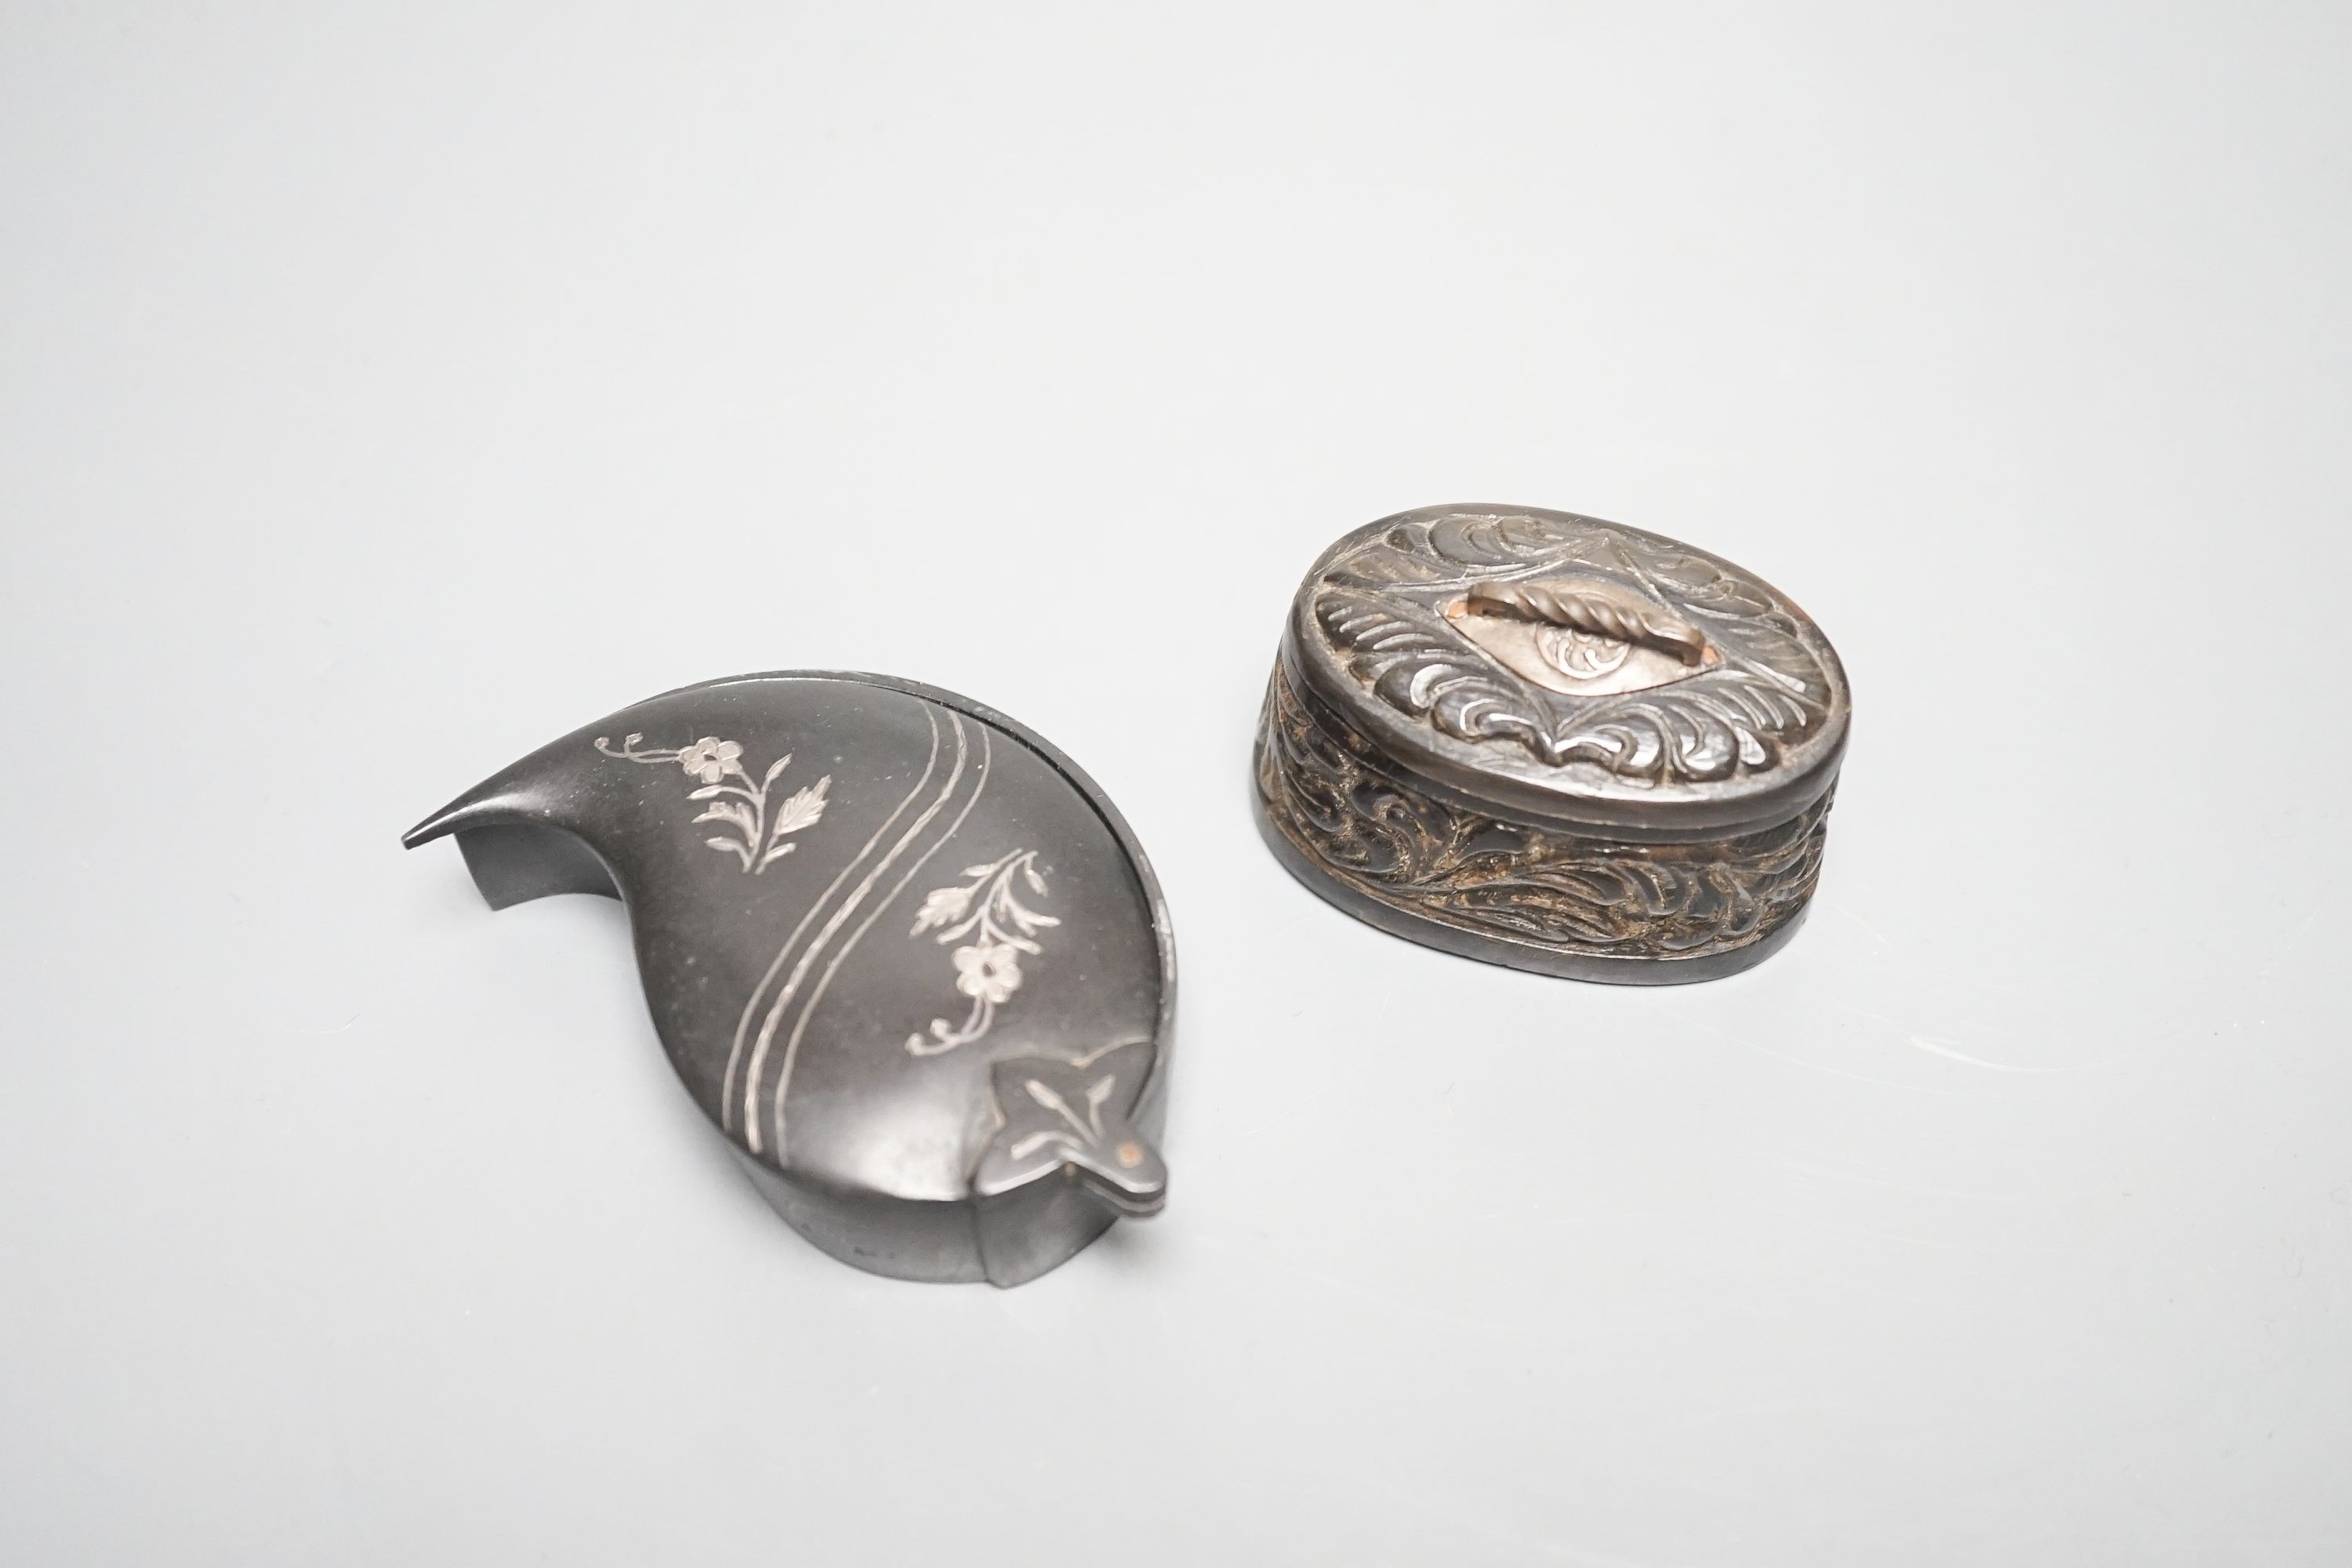 A 19th century Malay horn betel nut box and a Bidriware silver inlaid ‘boteh’ box and cover